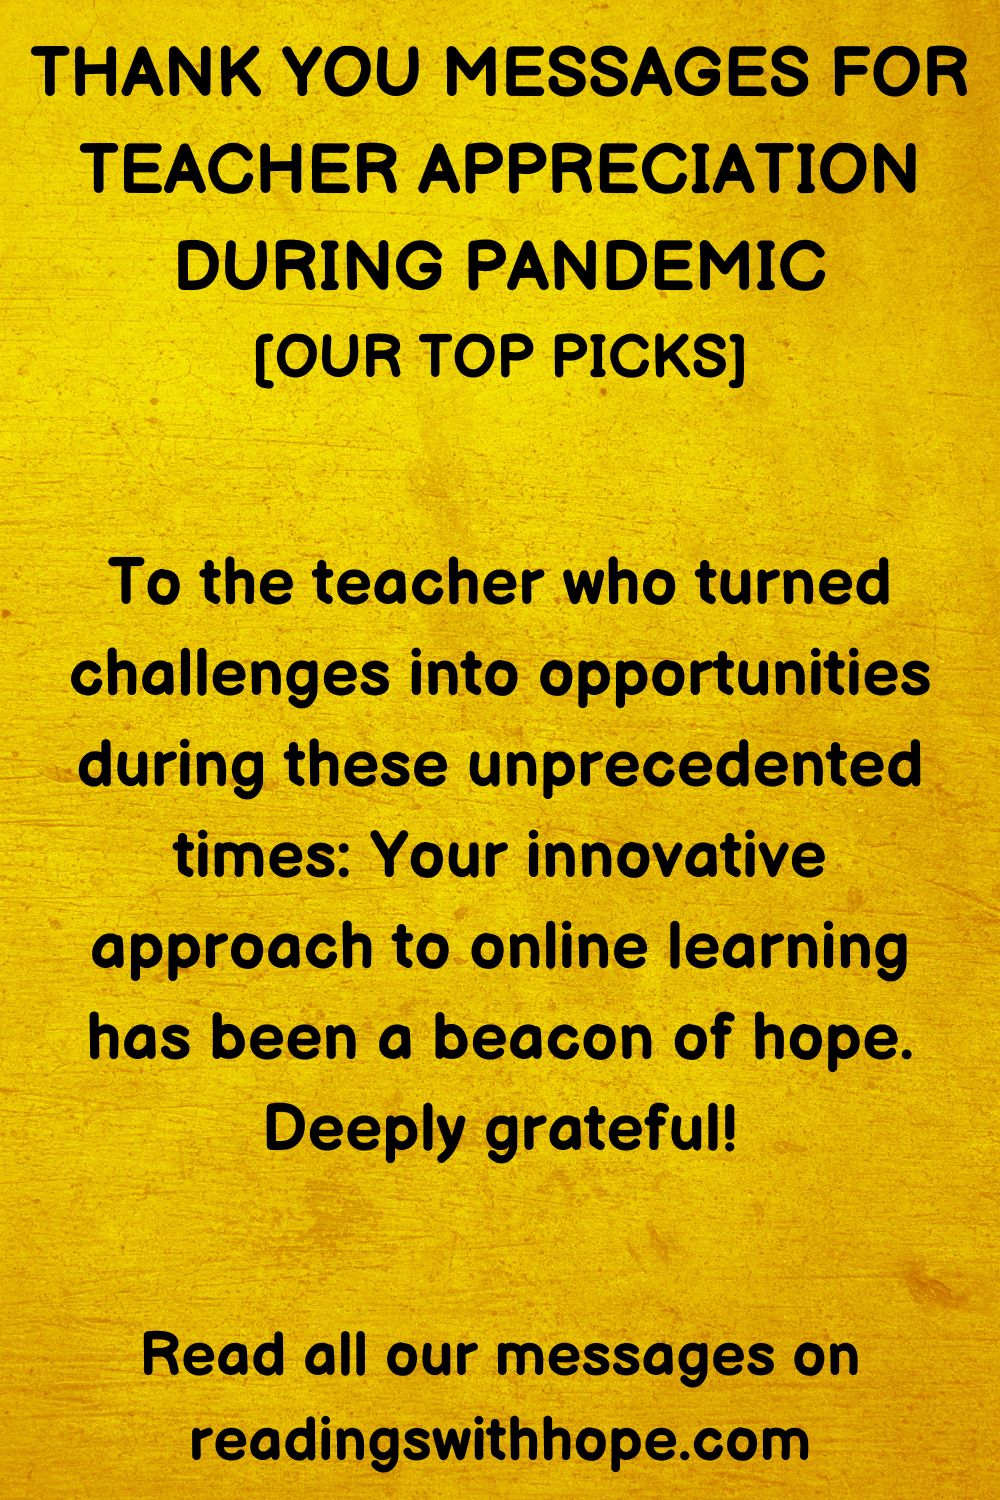 Thank You Messages For Teacher Appreciation During Pandemic
